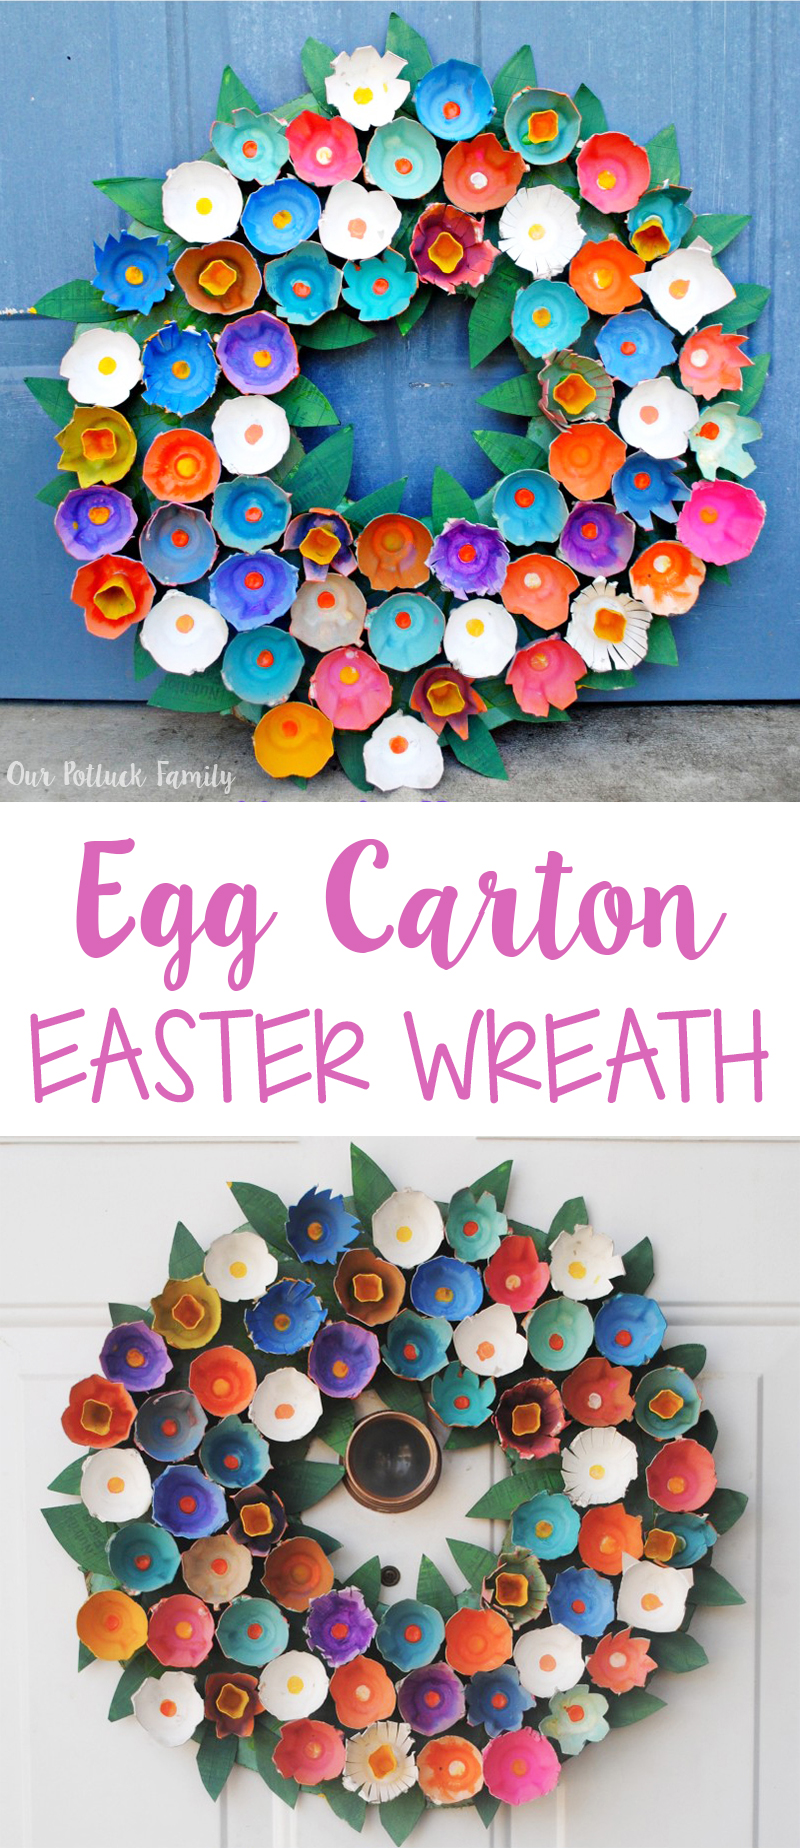 DIY Easter Wreath with Colorful Egg Carton Flowers